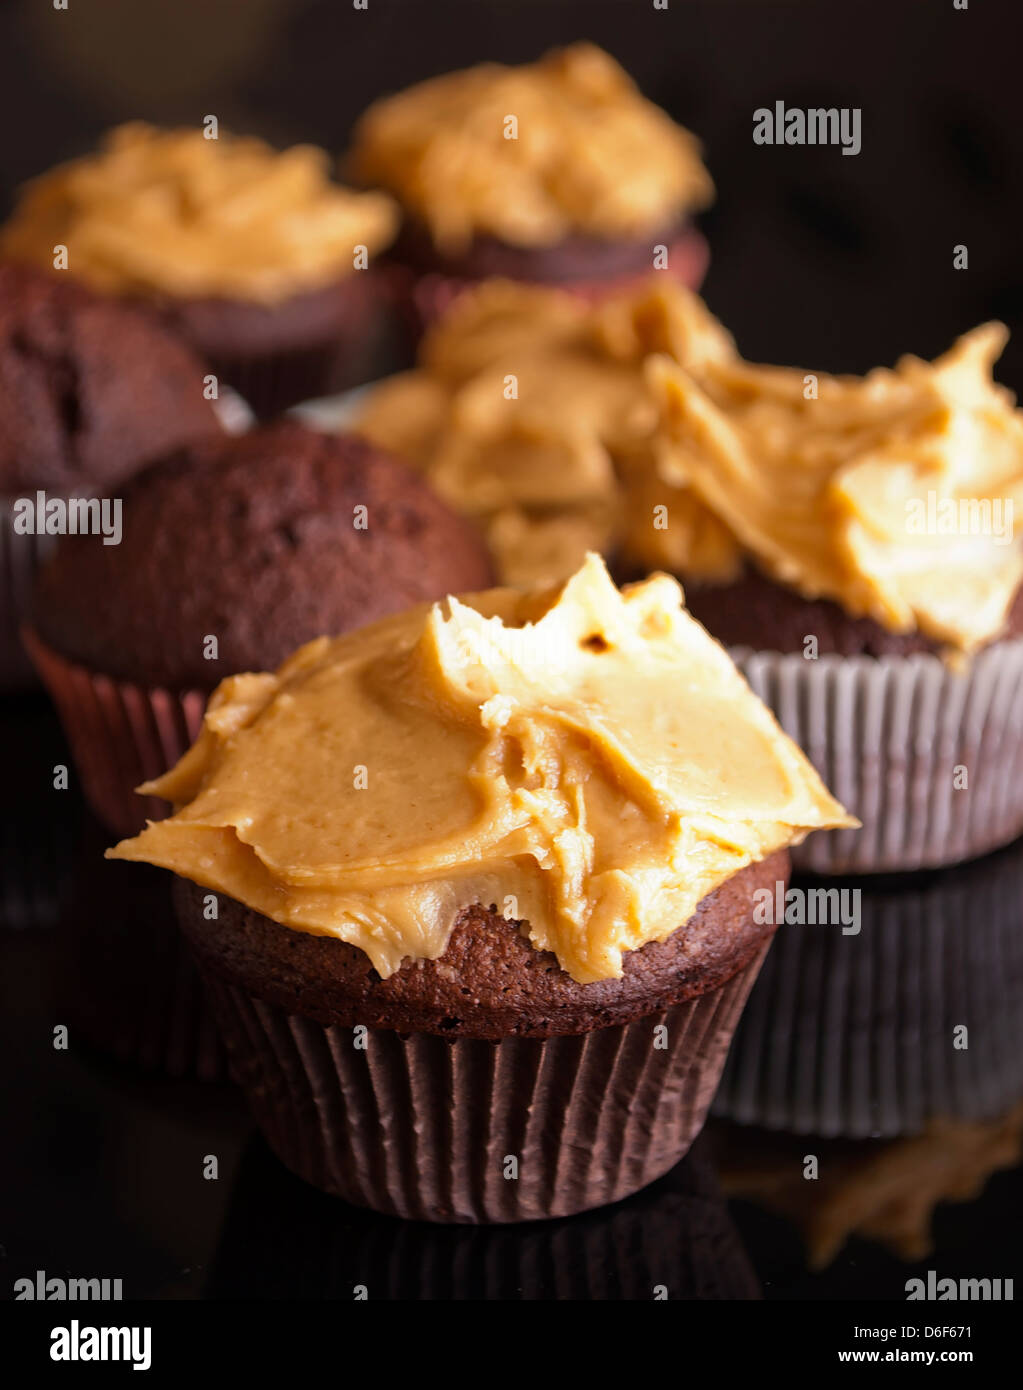 delicious homemade cupcakes with peanut butter icing Stock Photo